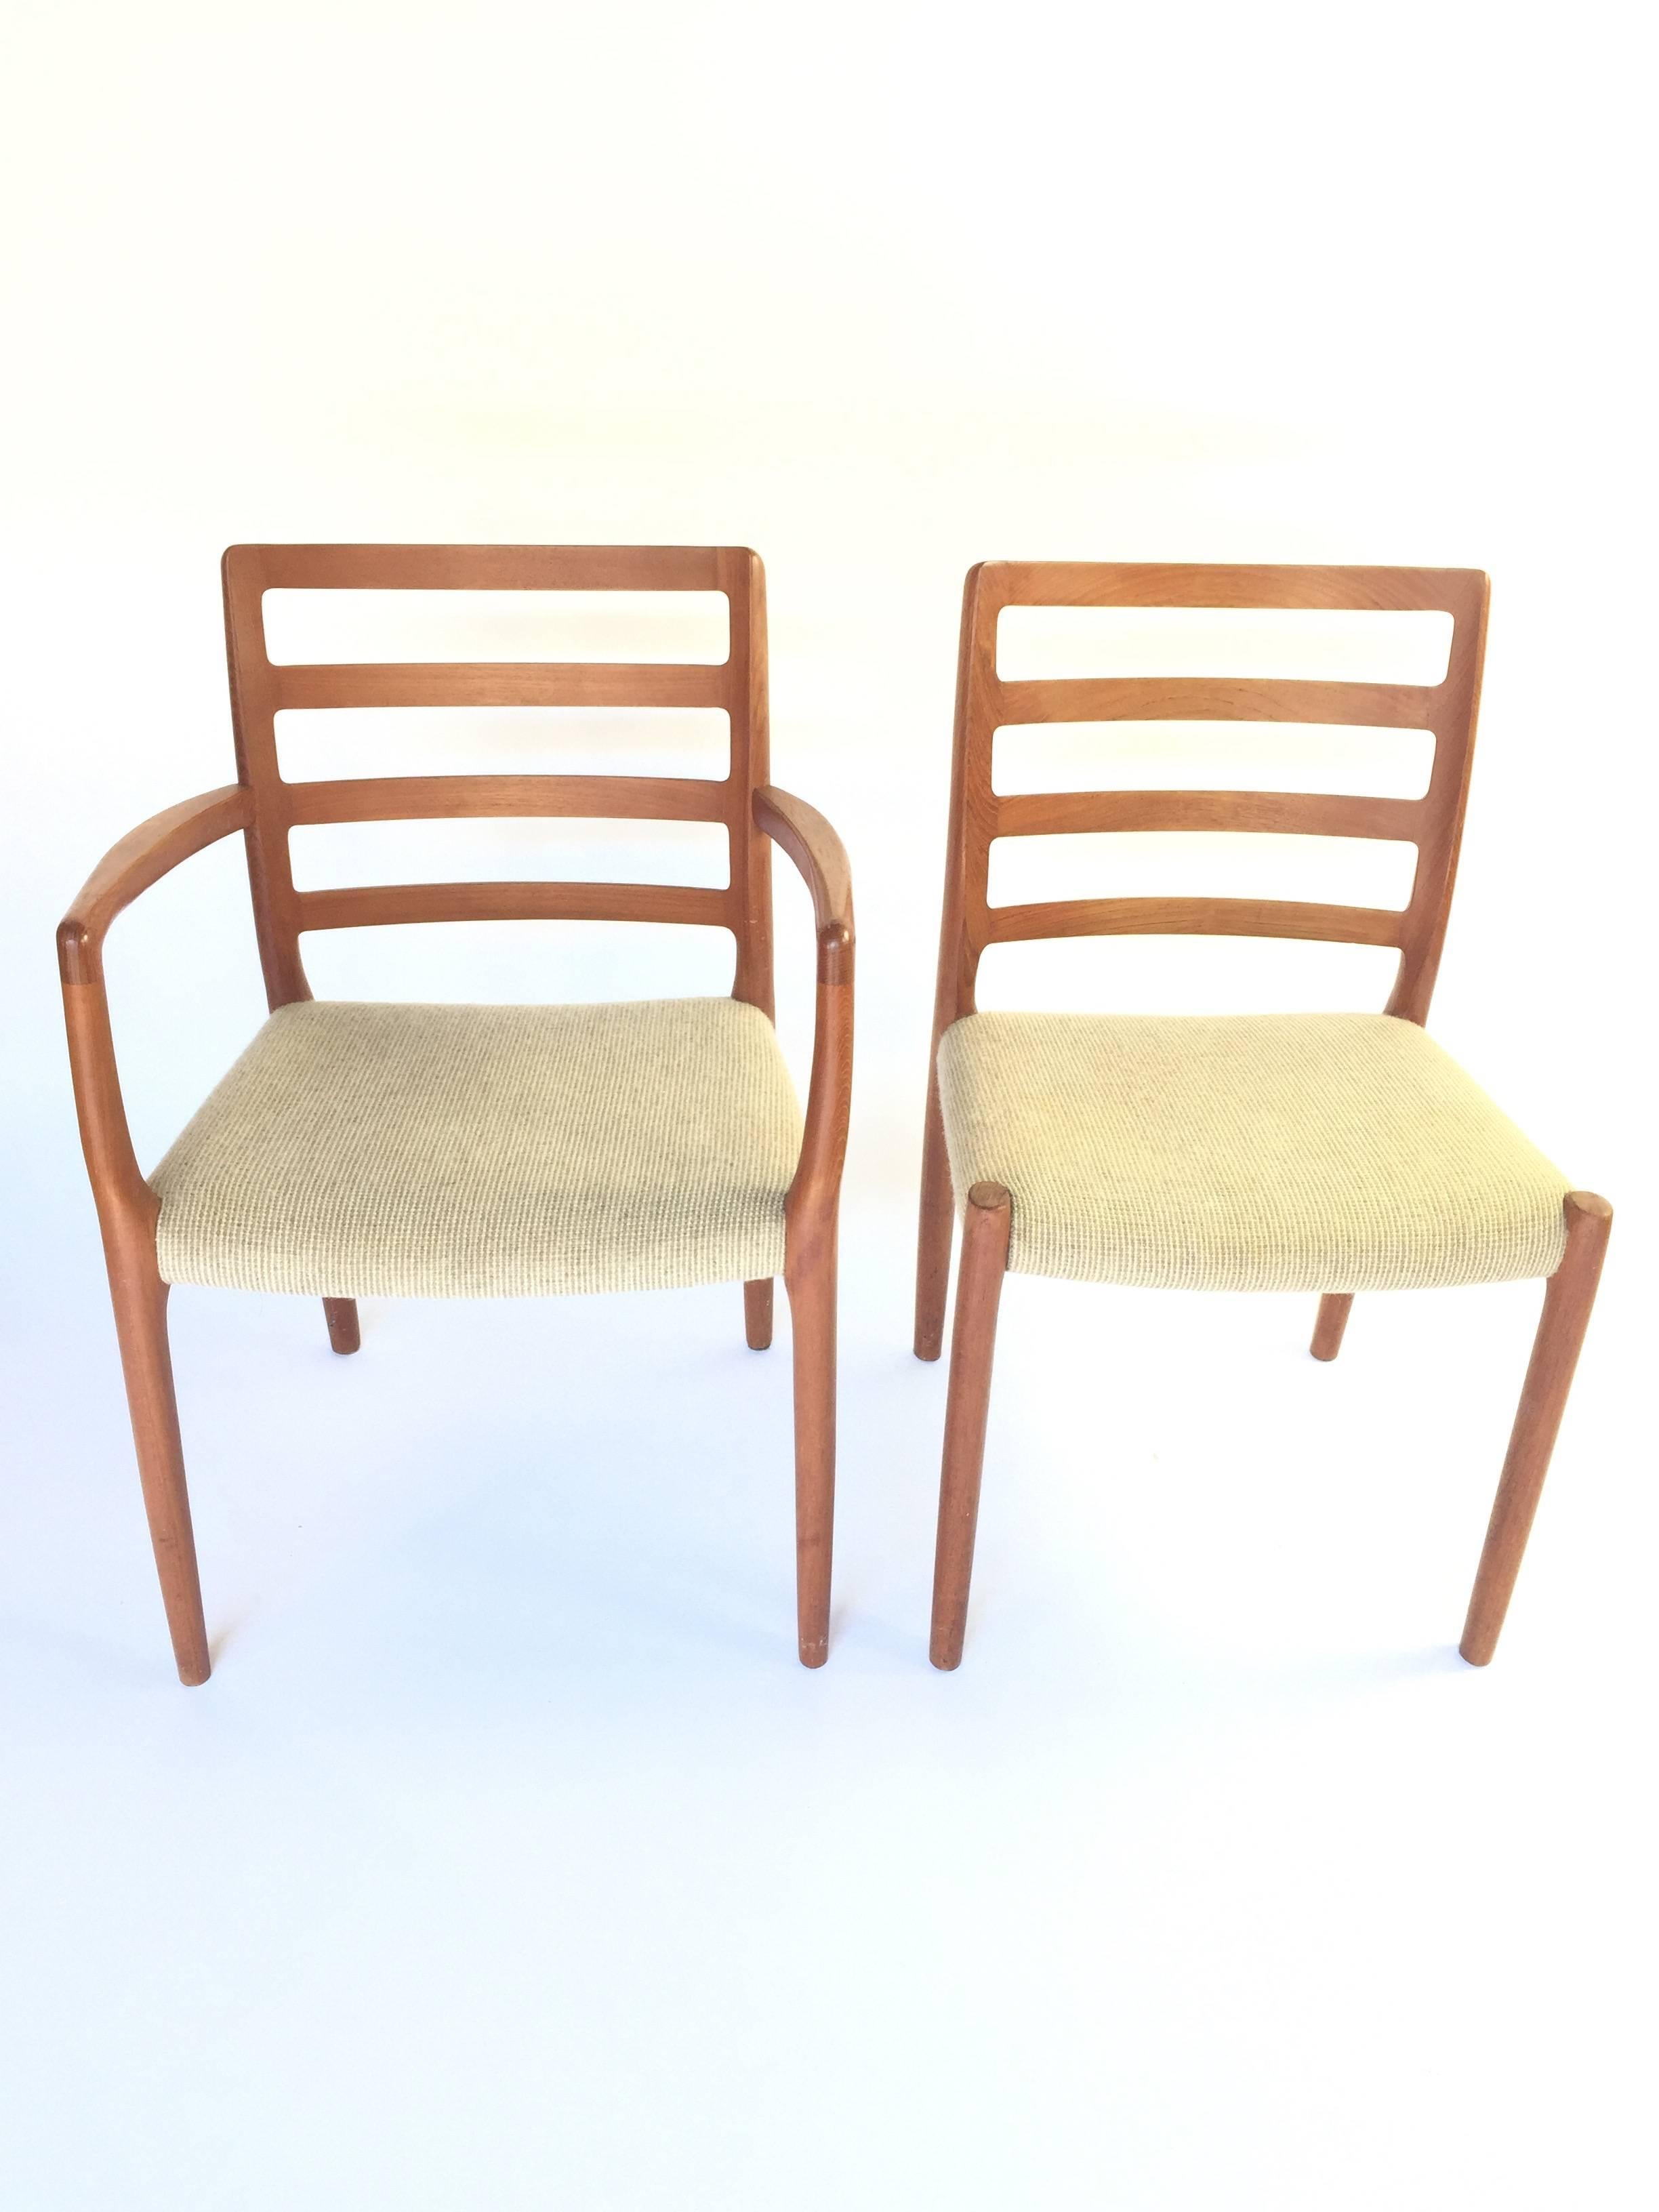 JL Moller teak model 85 dining chairs. 
Set of six including two armchairs and four side chairs. 
Original wool upholstery.